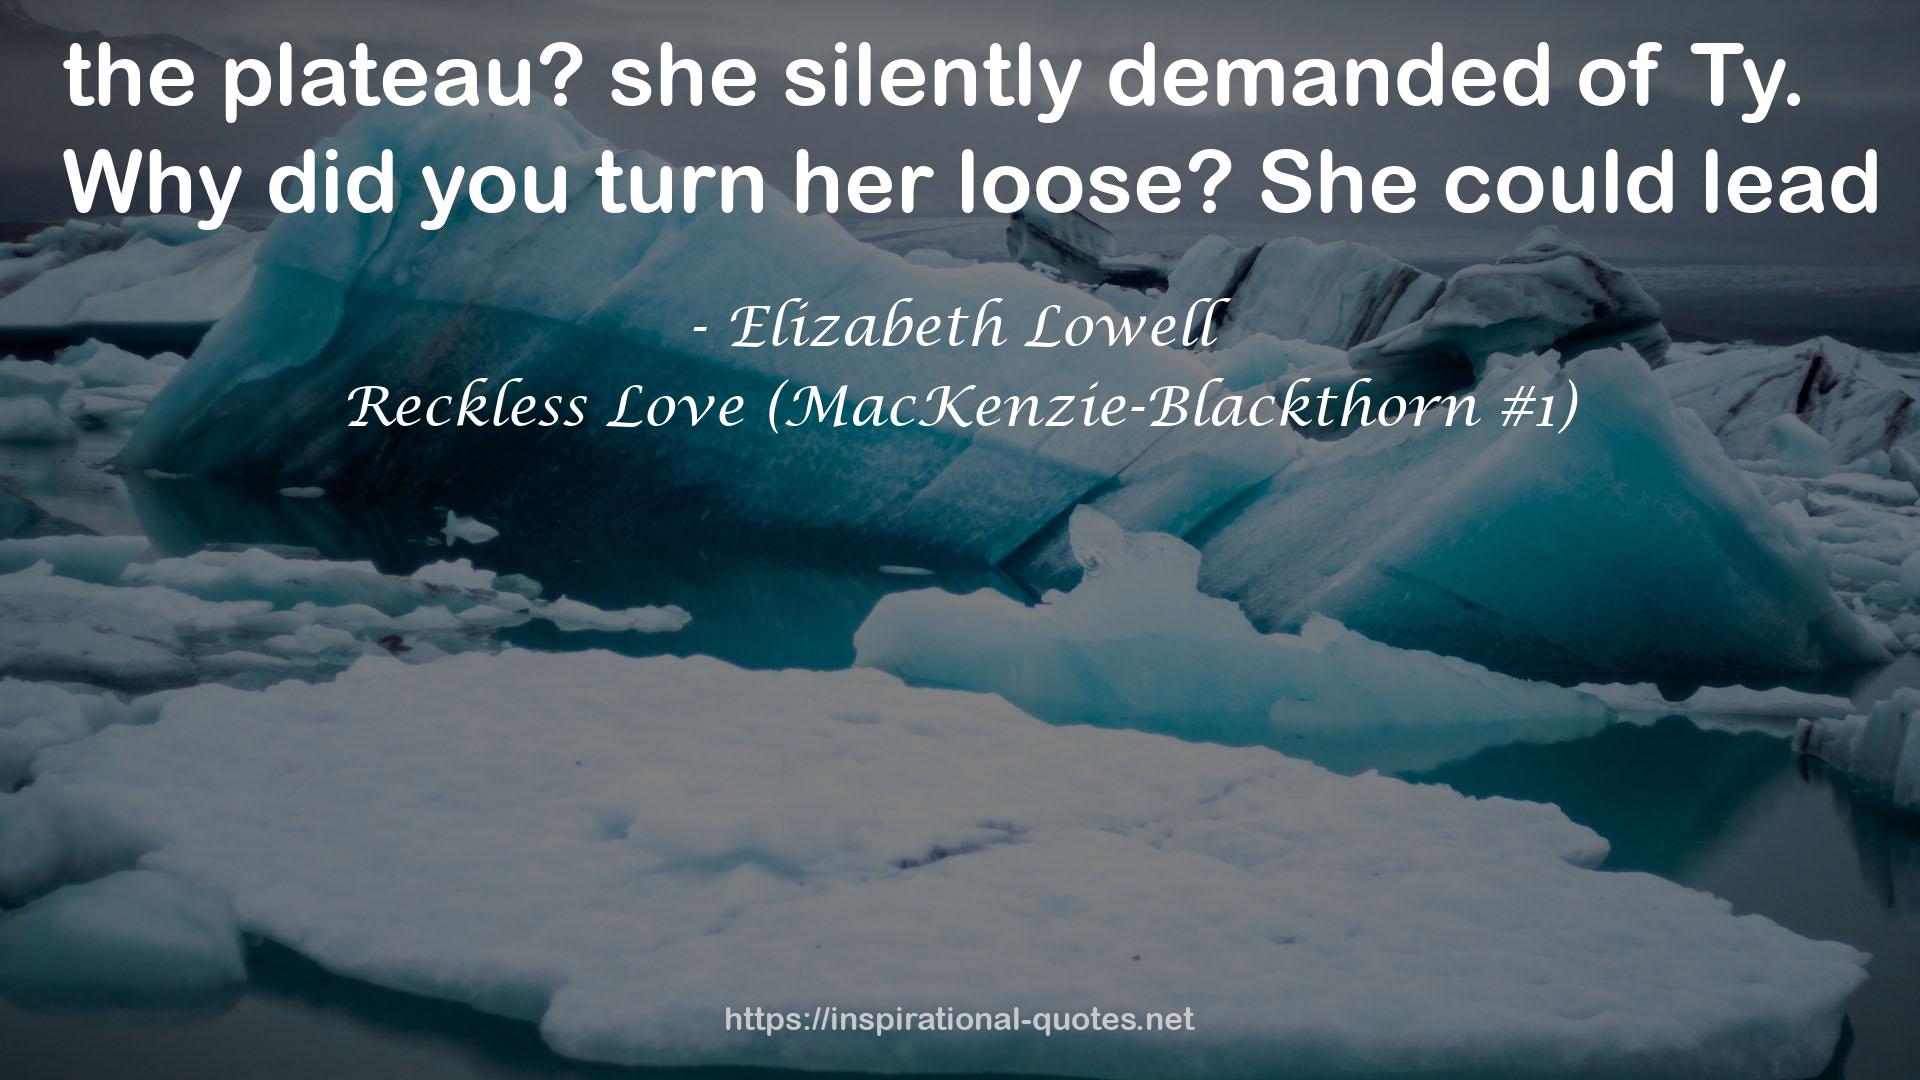 Reckless Love (MacKenzie-Blackthorn #1) QUOTES